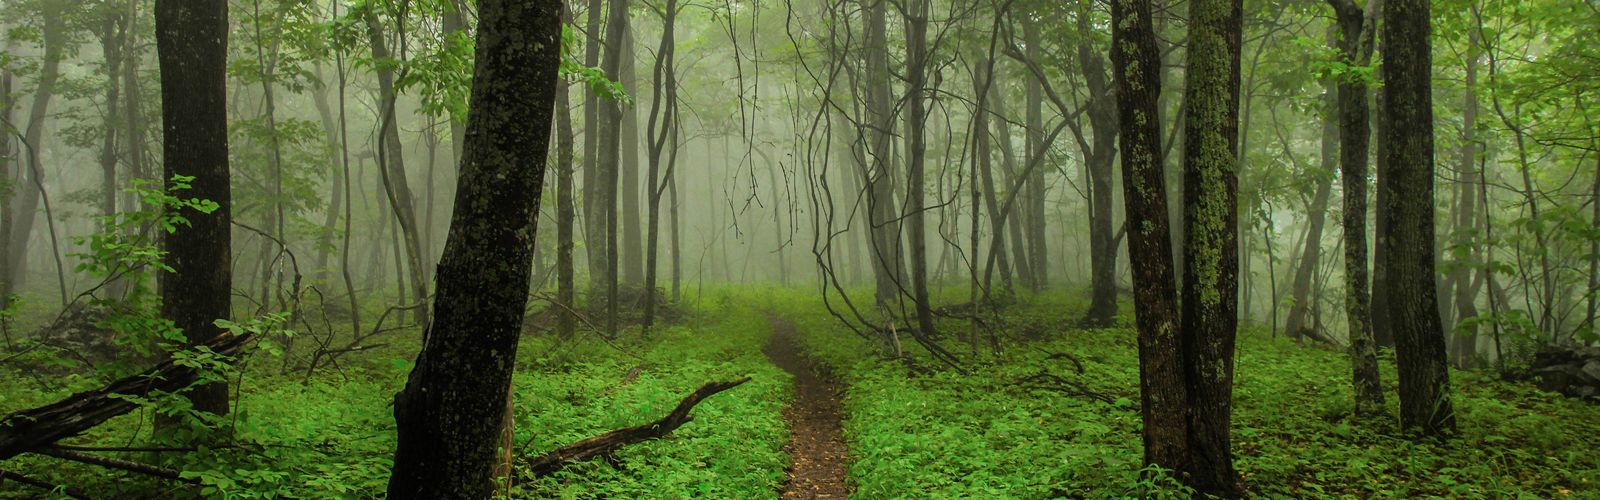 This picture beautifully illustrates what is known as "The Green Tunnel" on the Appalachian Trail. On the morning of June 4th of 2015 I captured this image in Virginia while thru hiking the Appalachian Trail. The lush vegetation and whimsical fog embodied everything I love about nature. When I view this image I am temporarily transported back into the forest.